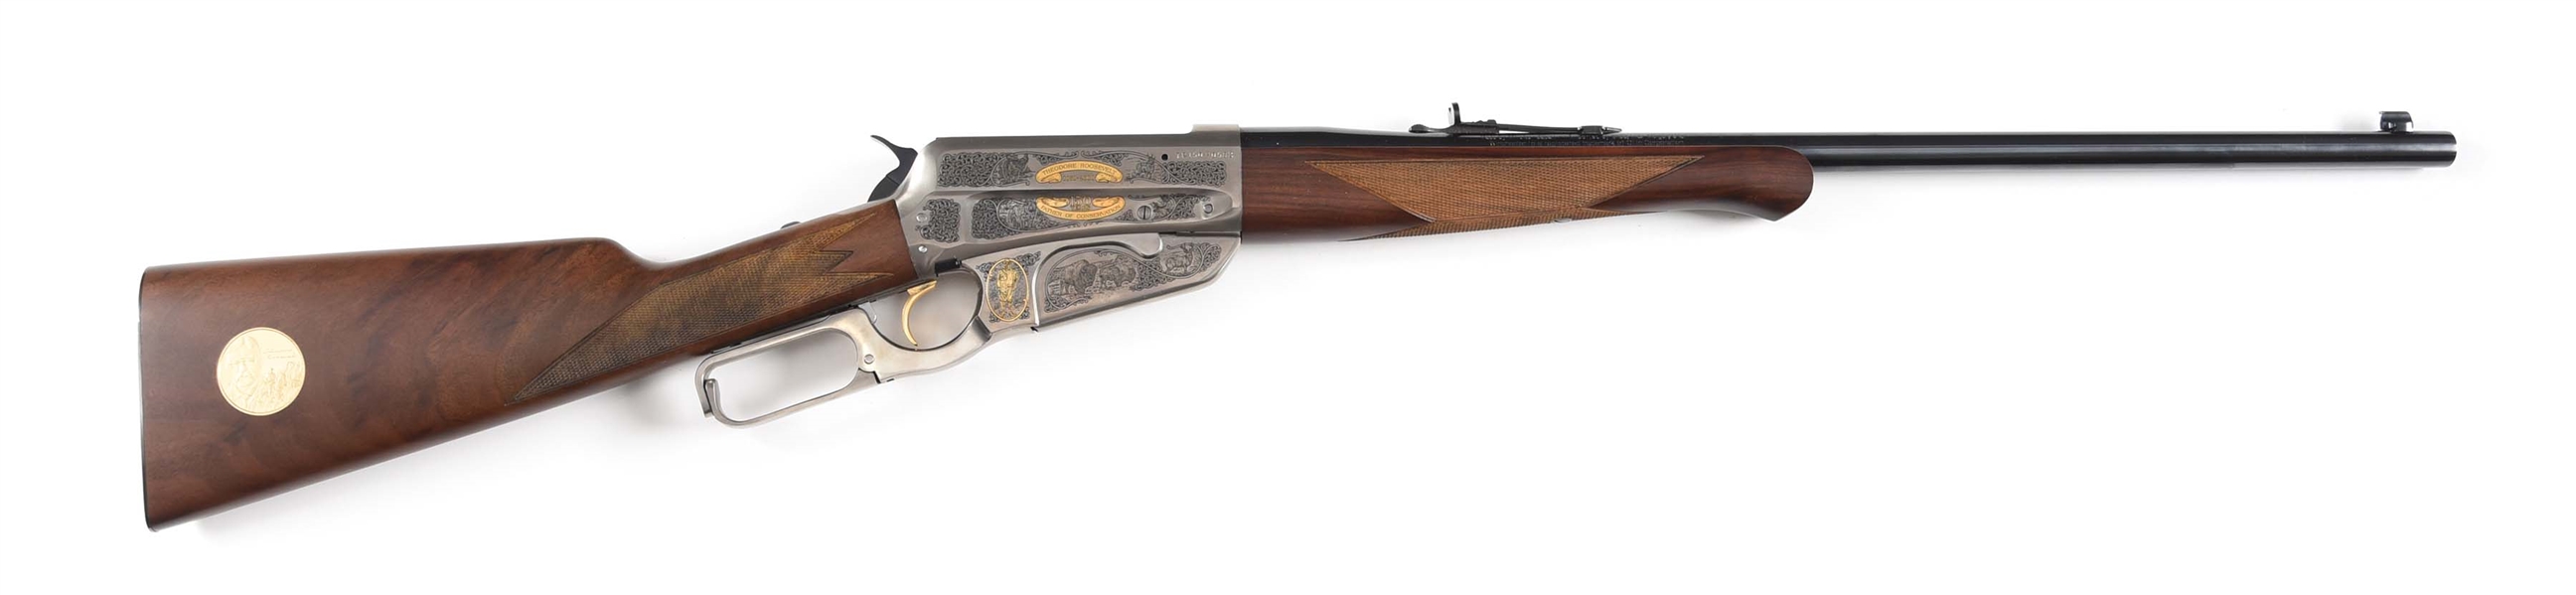 (M) WINCHESTER MODEL 1895 THEODORE ROOSEVELT COMMEMORATIVE LEVER ACTION RIFLE.